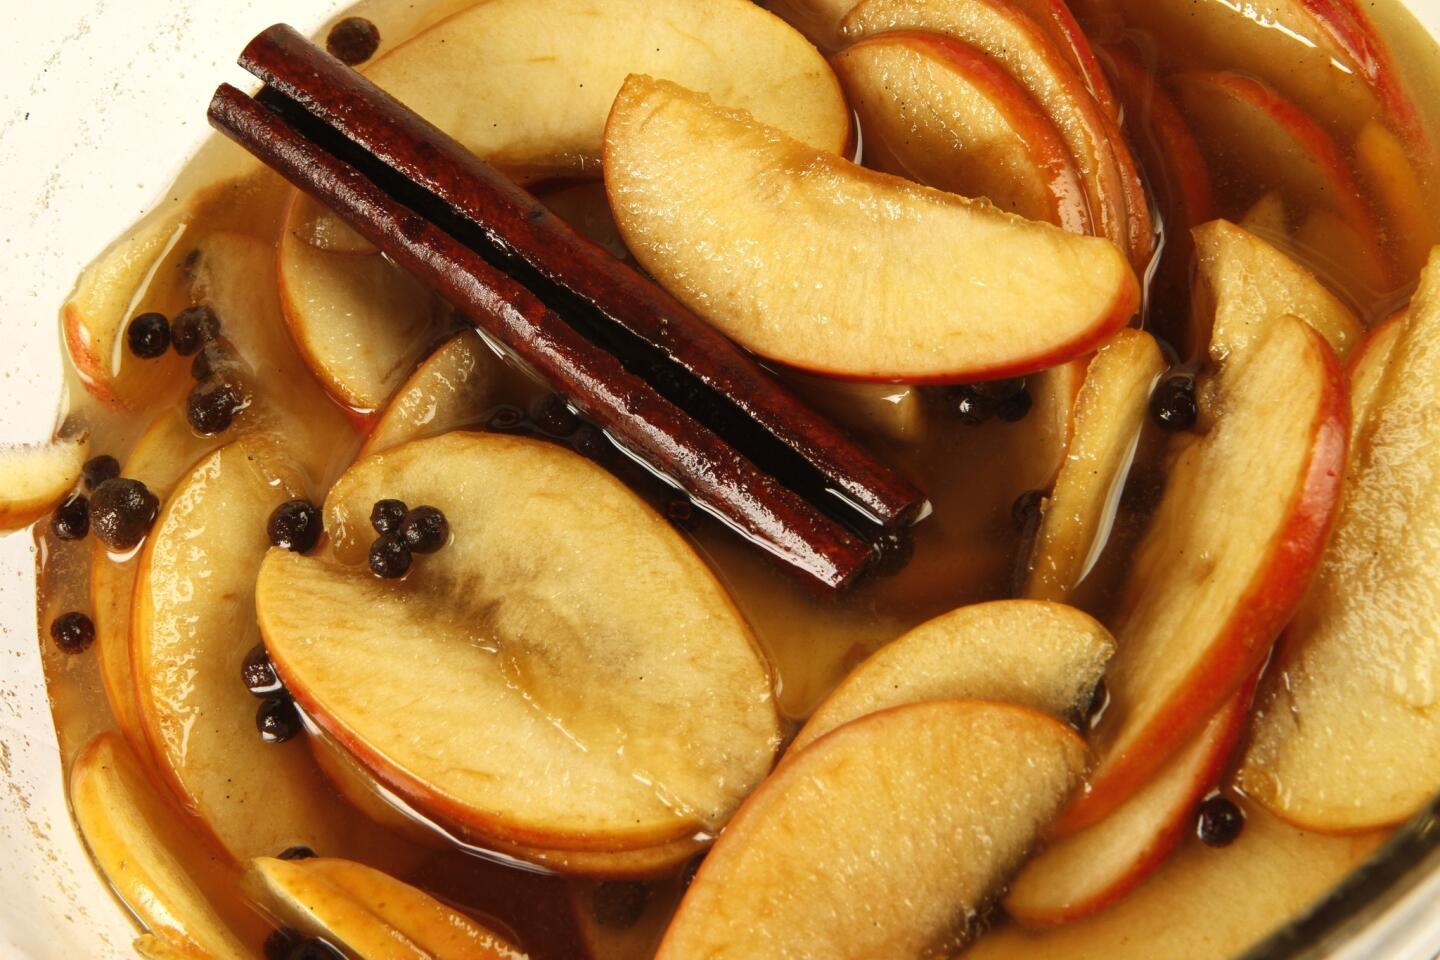 Quick-pickled apples